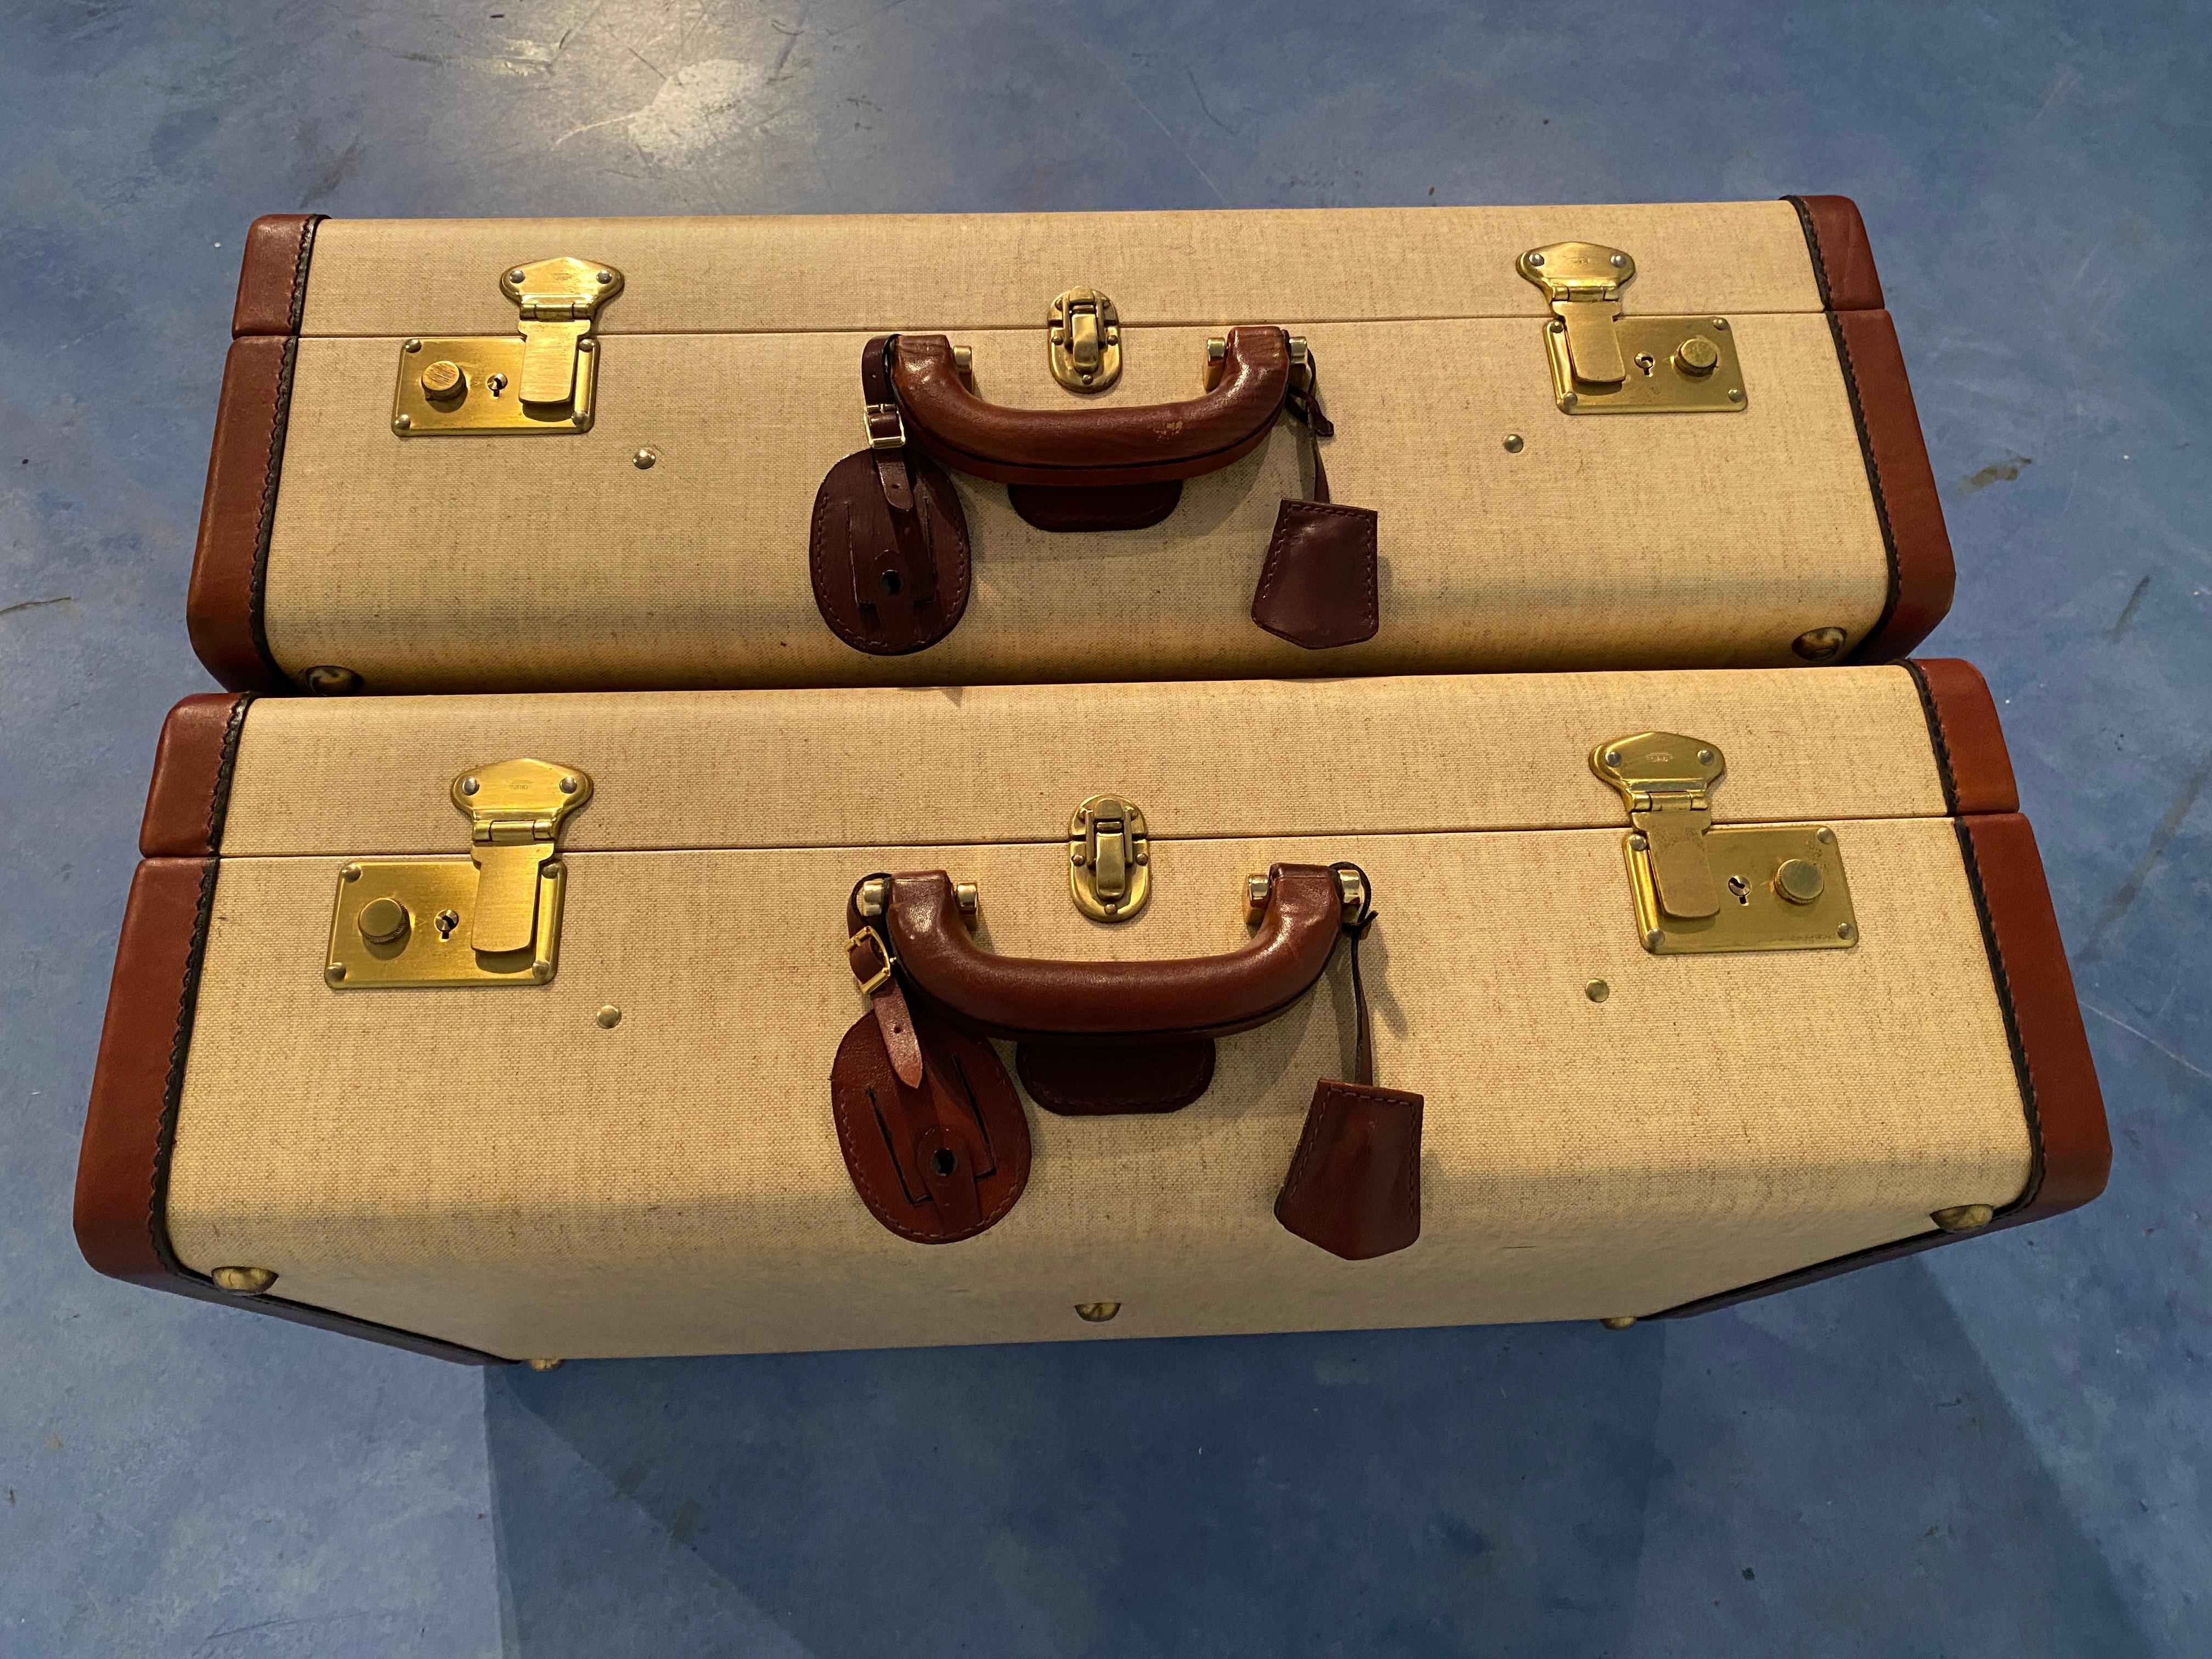 Italian Mid-Century Moder Luggages or Suitcases Mèlange Color, Set of Two, 1960 For Sale 12